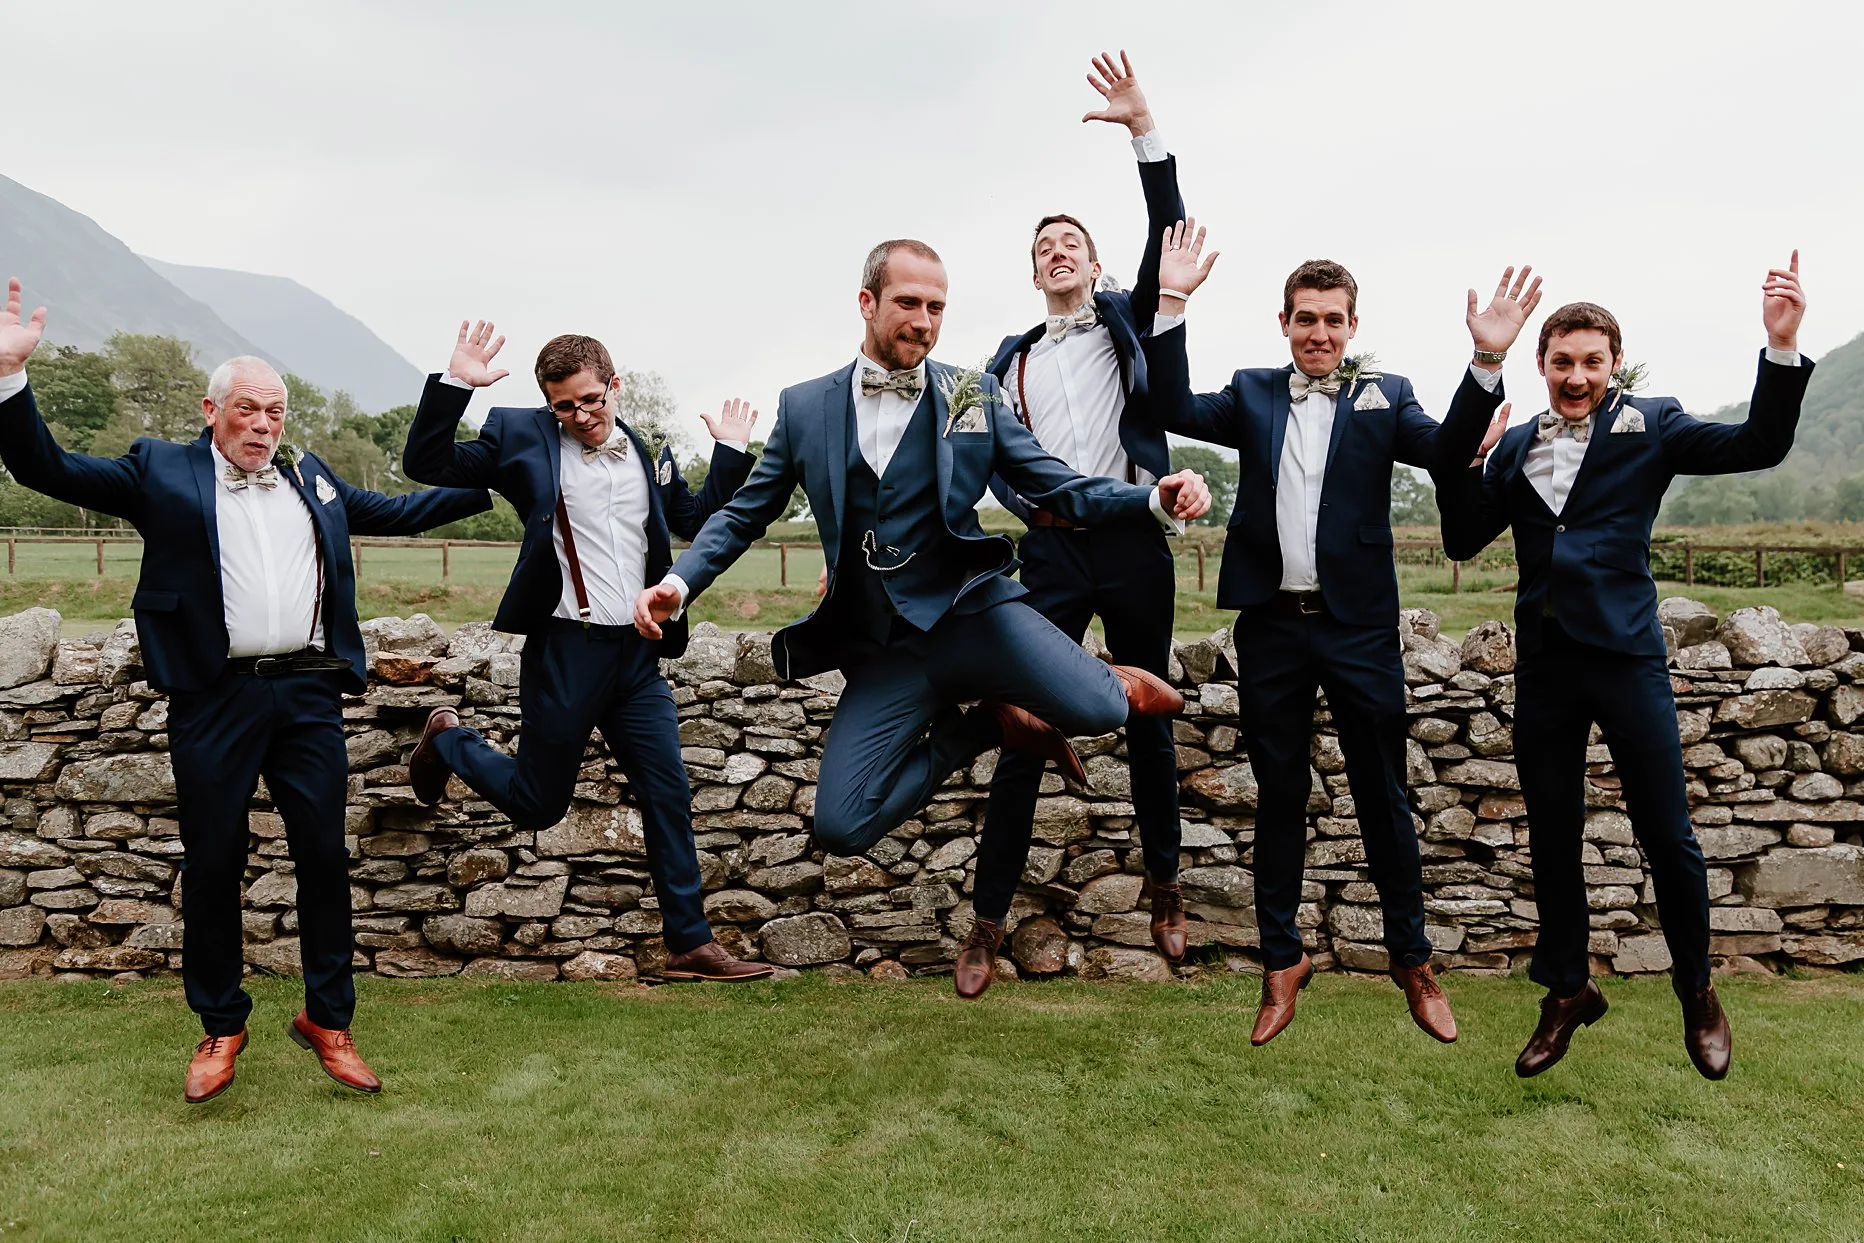 Groom and his groomsmen dressed in blue suits jumping in the air in the gardens of New House Farm wedding barn